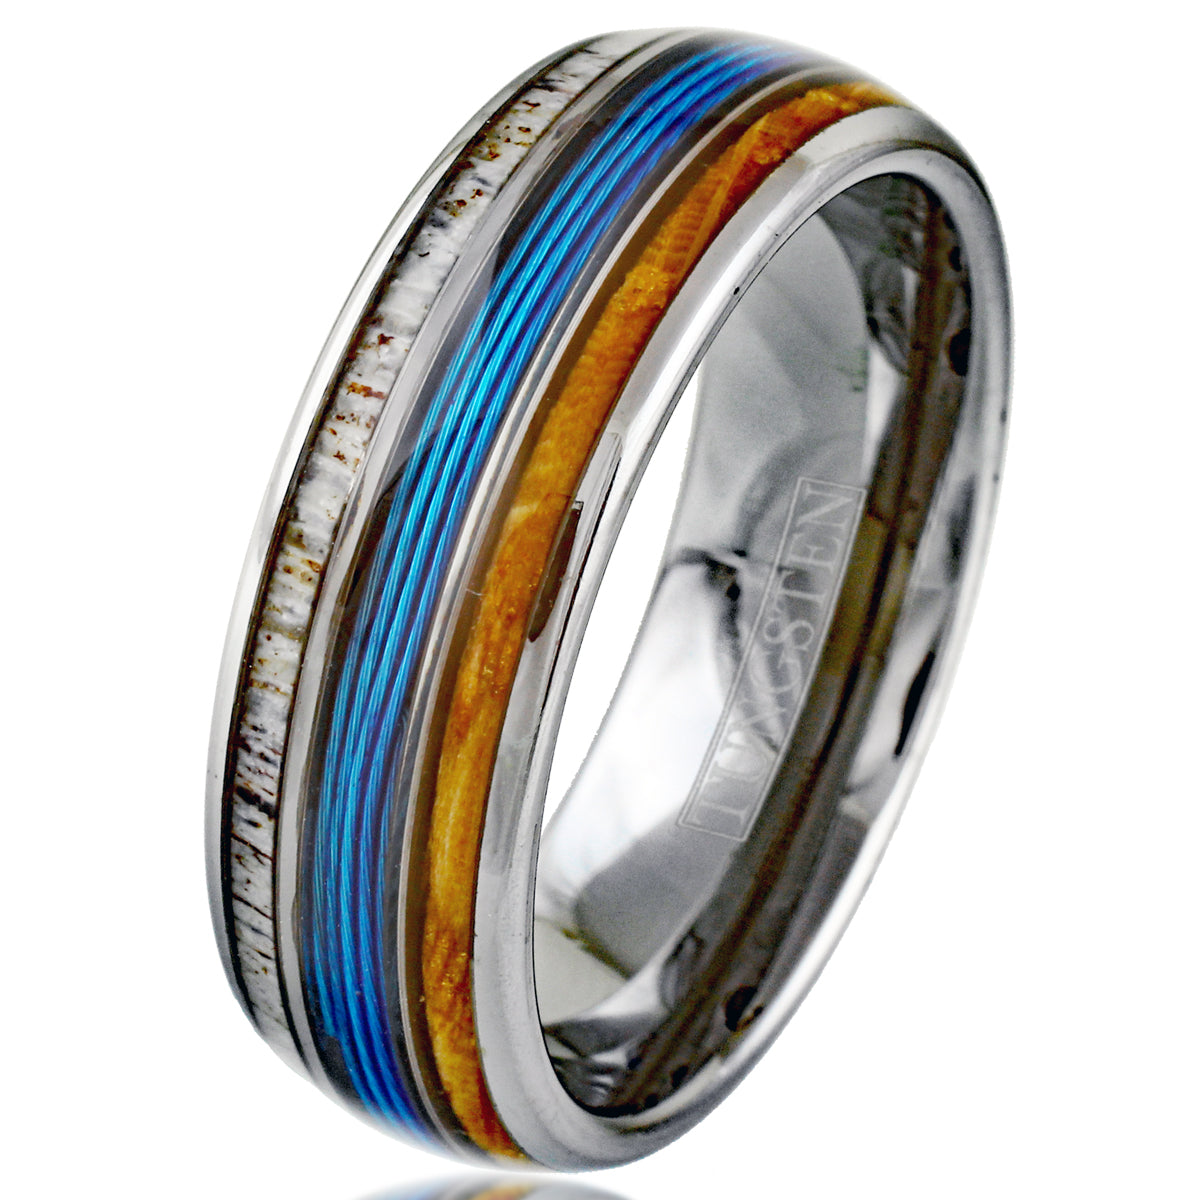 Stunning Mirror Polished Silver Tungsten Low Dome Ring with Blue Real Fishing Line Between Whiskey Barrel Oak Wood and Deer Antler Inlays.